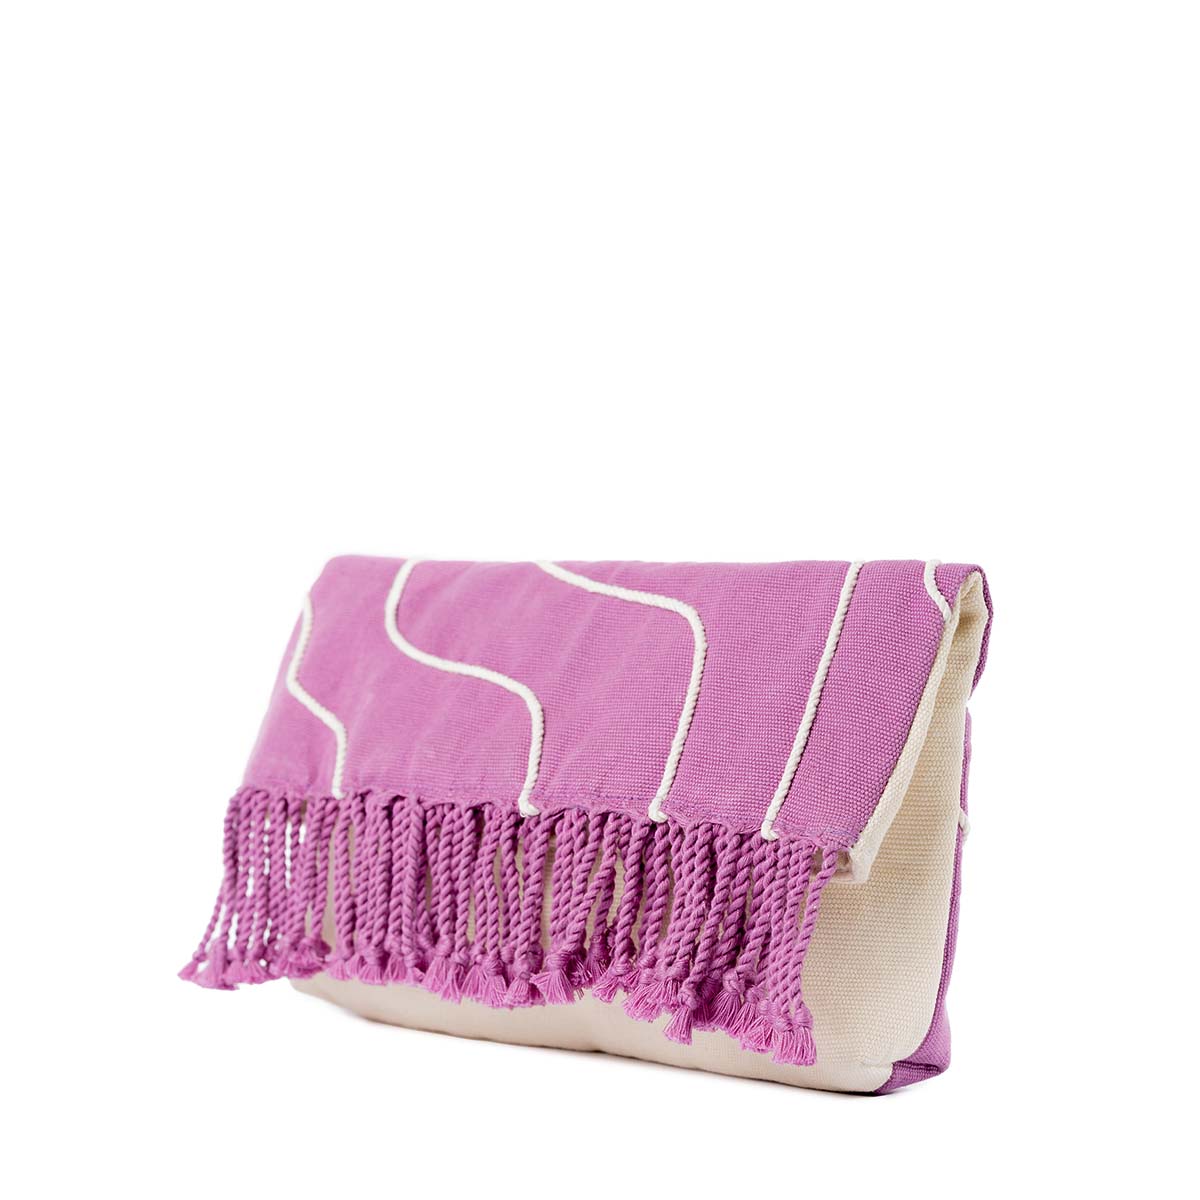 Right-sided angle of the hand woven artisan Margarita Clutch in Cosmic Waves. It has a magenta solid background with thin wavy white stripes. The top has magenta fringe.